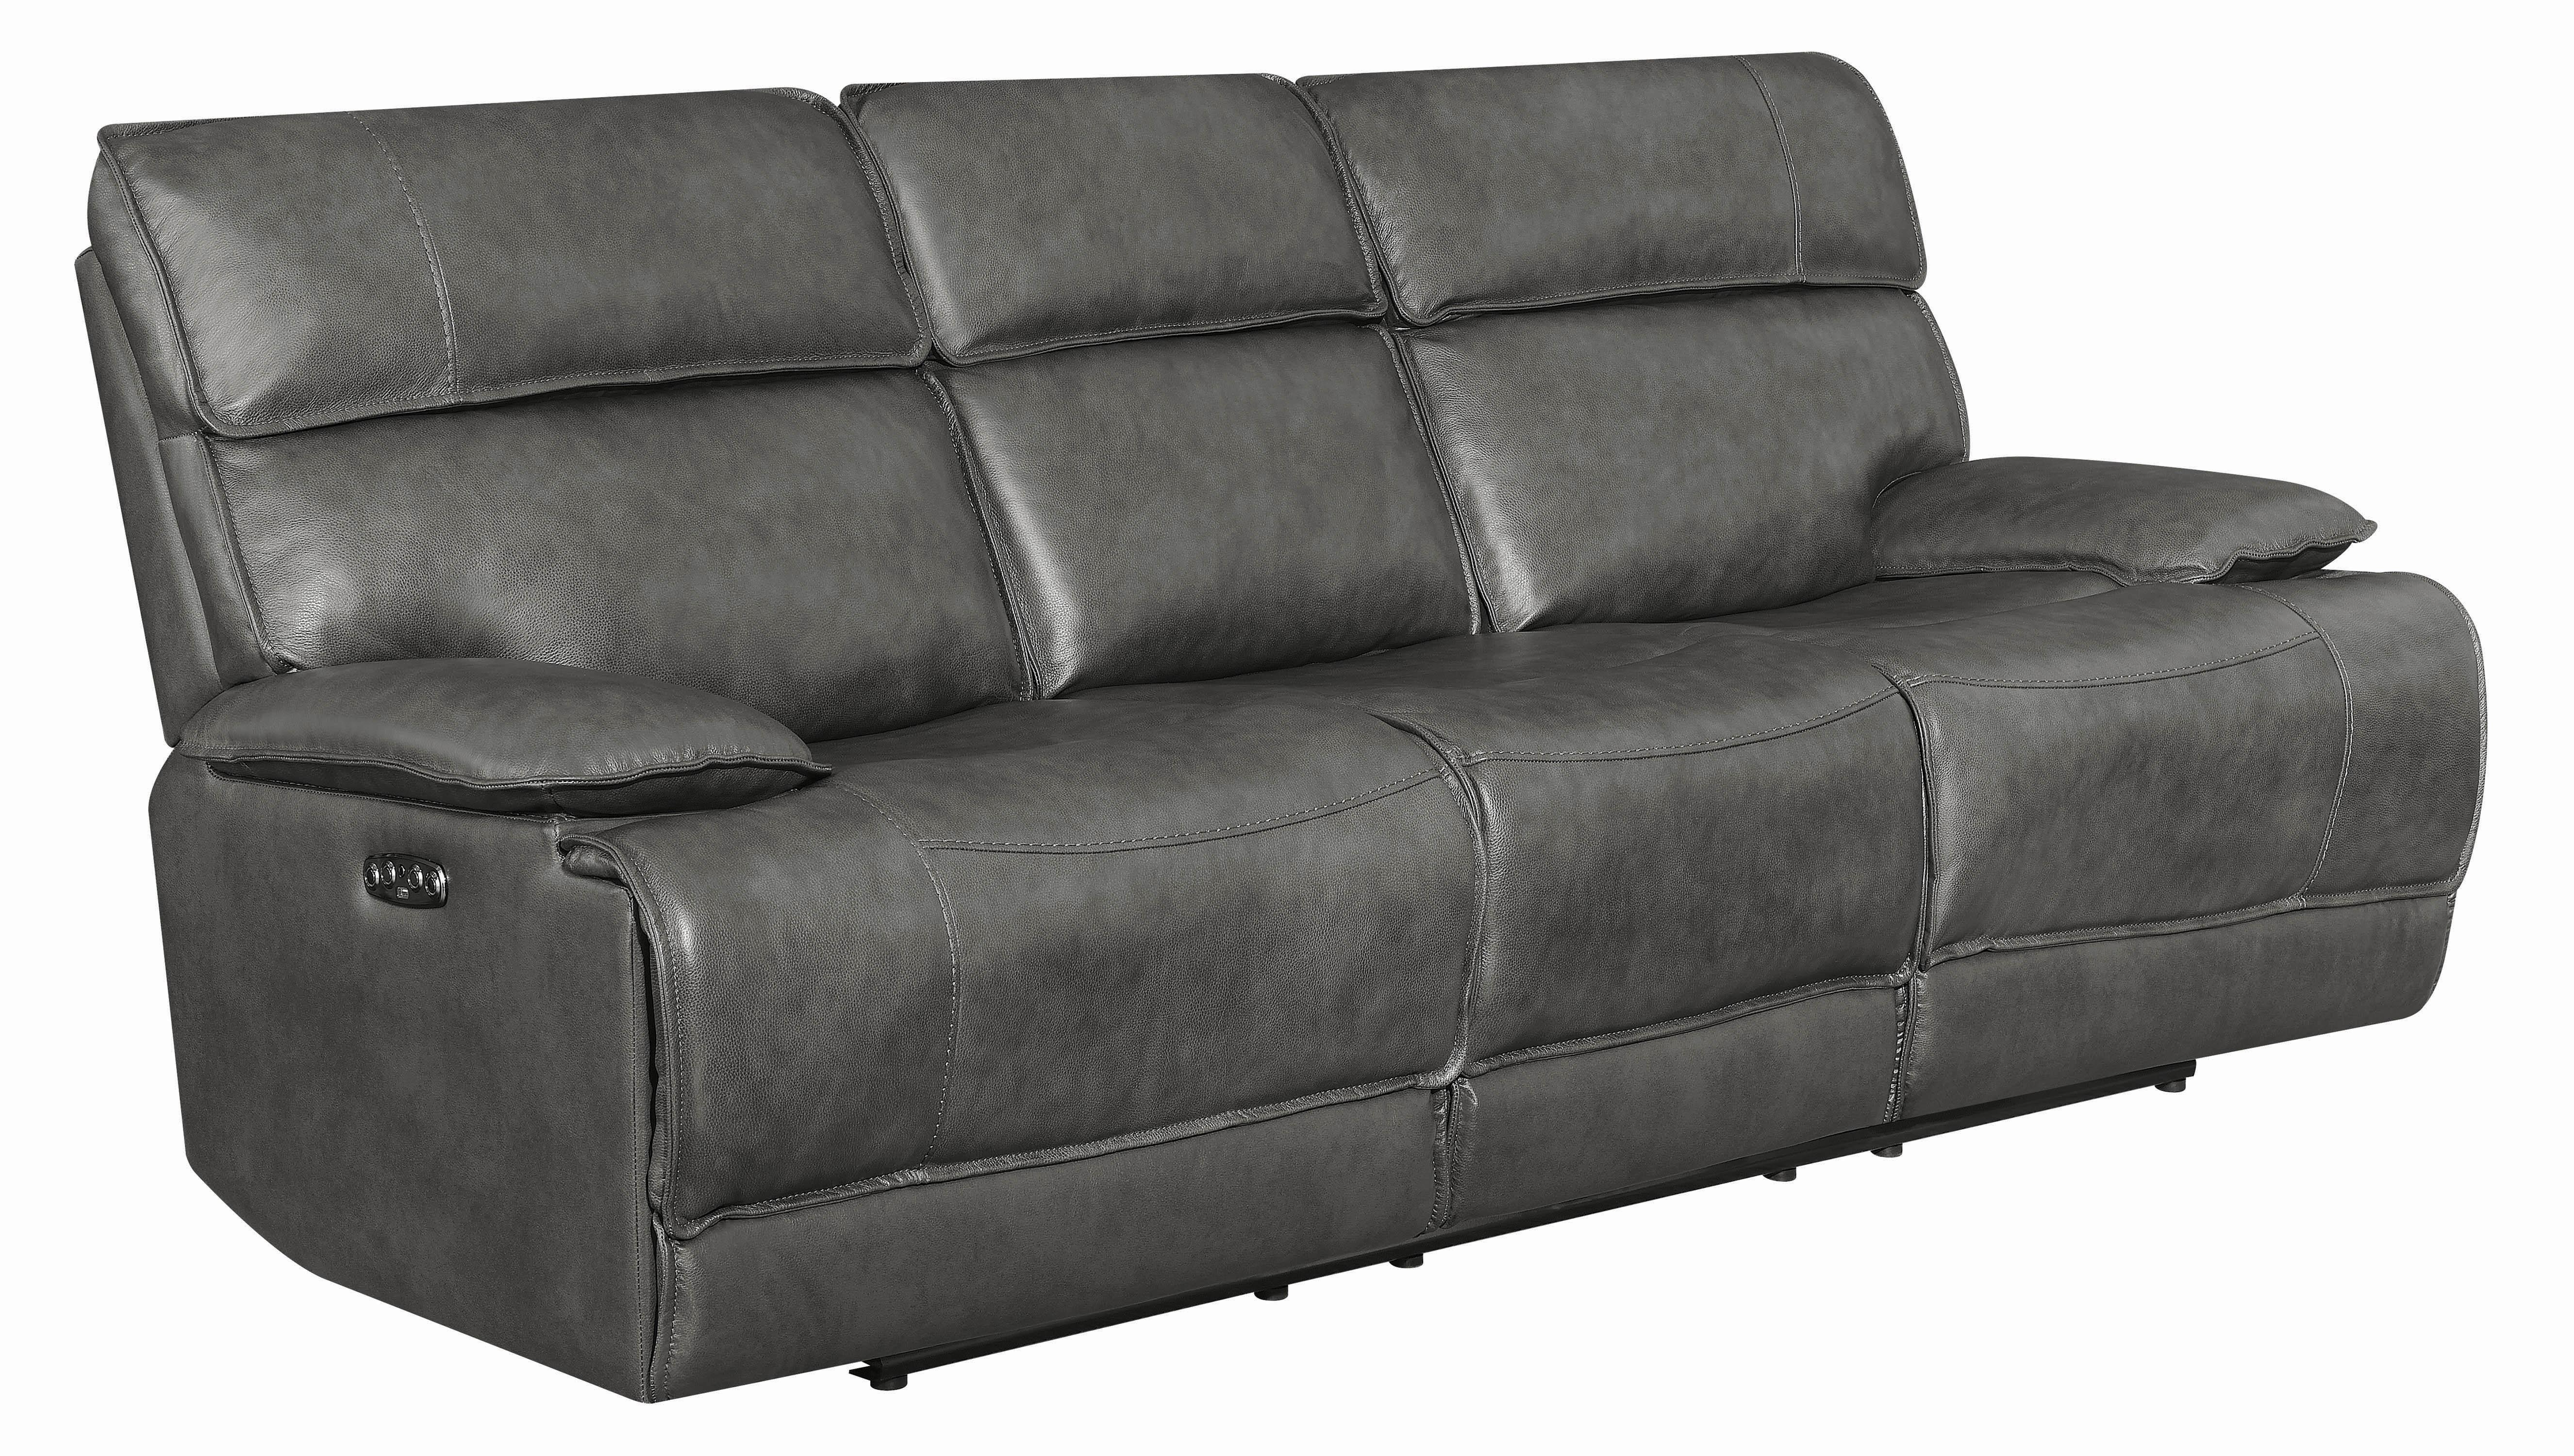 Modern Bt power2 sofa Stanford 650221PPB in Gray Leather